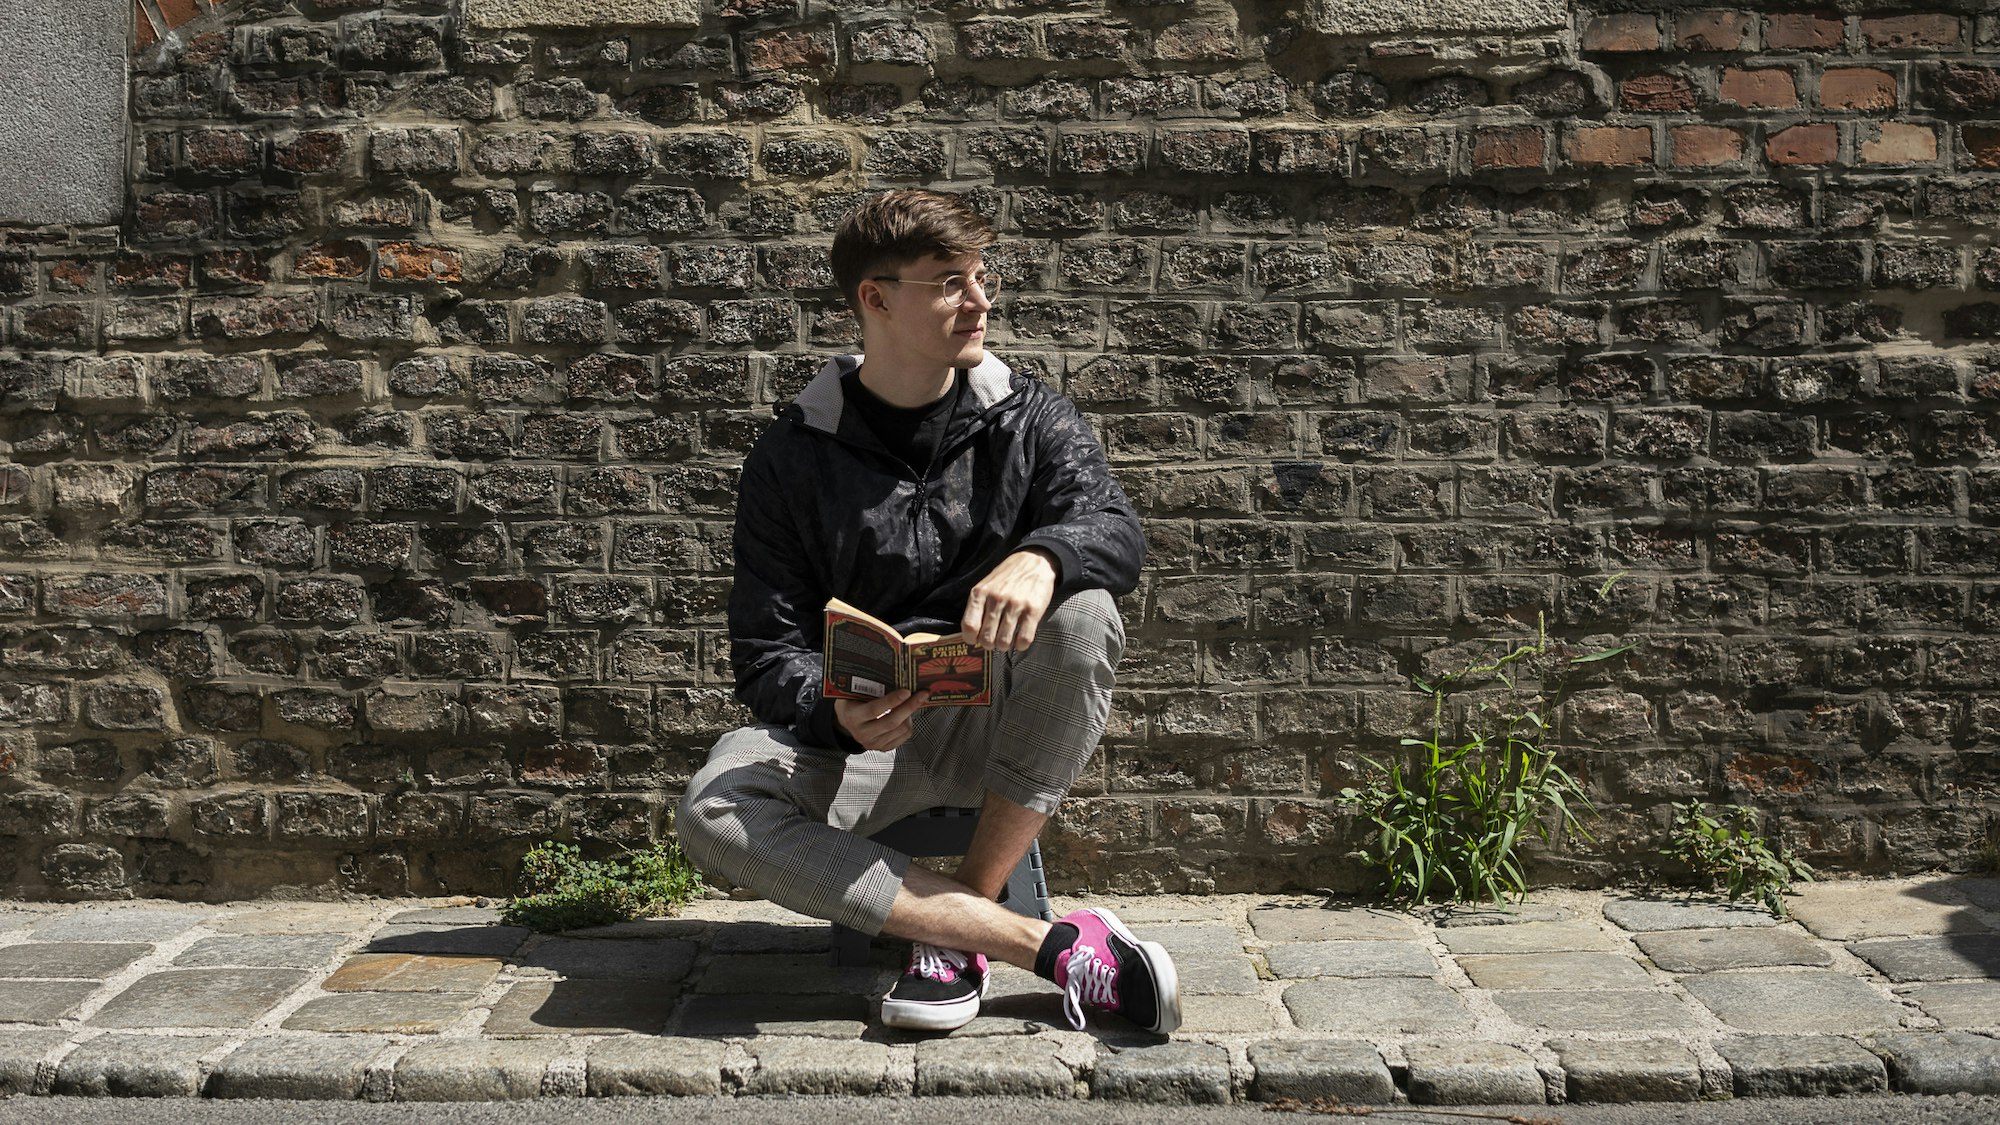 Christoph is sitting in front of an old brick wall with a book in his hand.